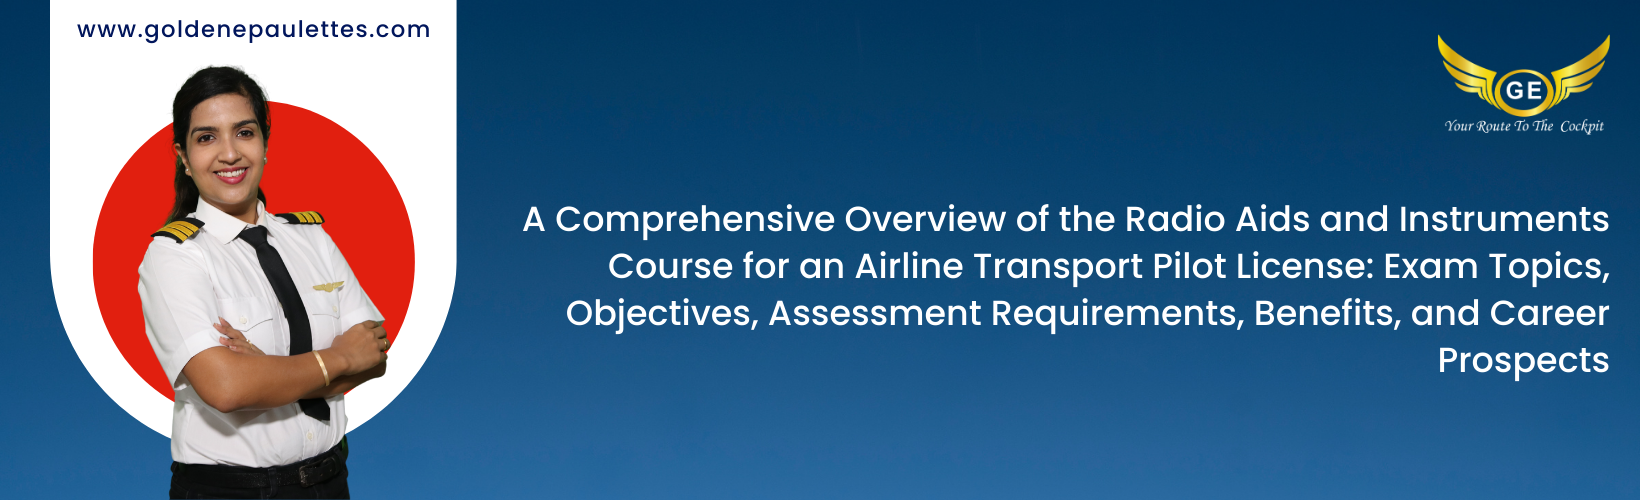 Radio Aids and Instruments Course in Airline Transport Pilot License